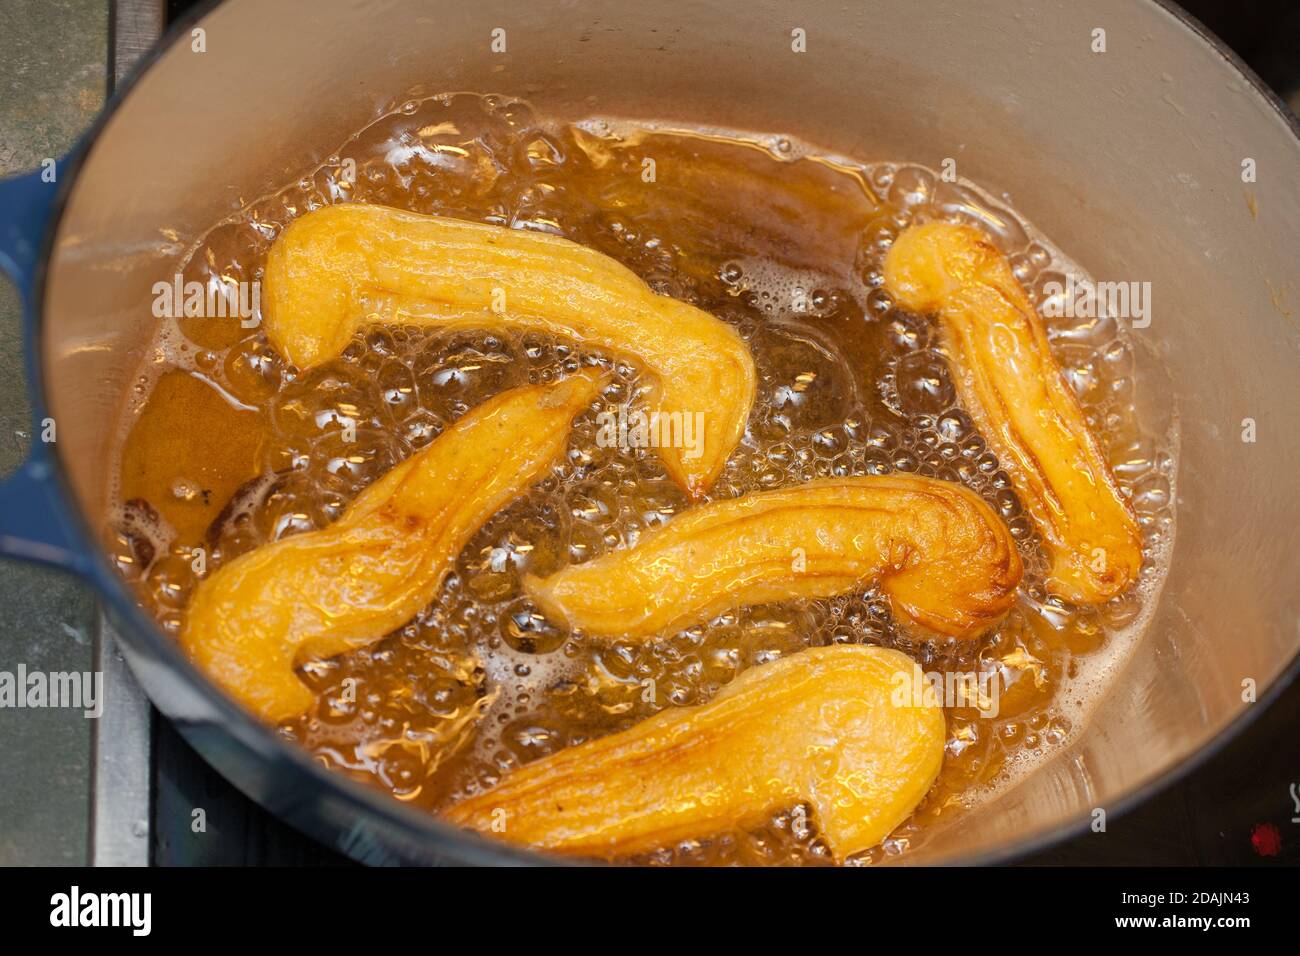 Cooking And Deep Frying In Fatiscent Big Pan Or Wok, Street Food Stall In  India, Junk Unhealthy Eating. Fire Coming Out Below The Pan. Stock Photo,  Picture and Royalty Free Image. Image